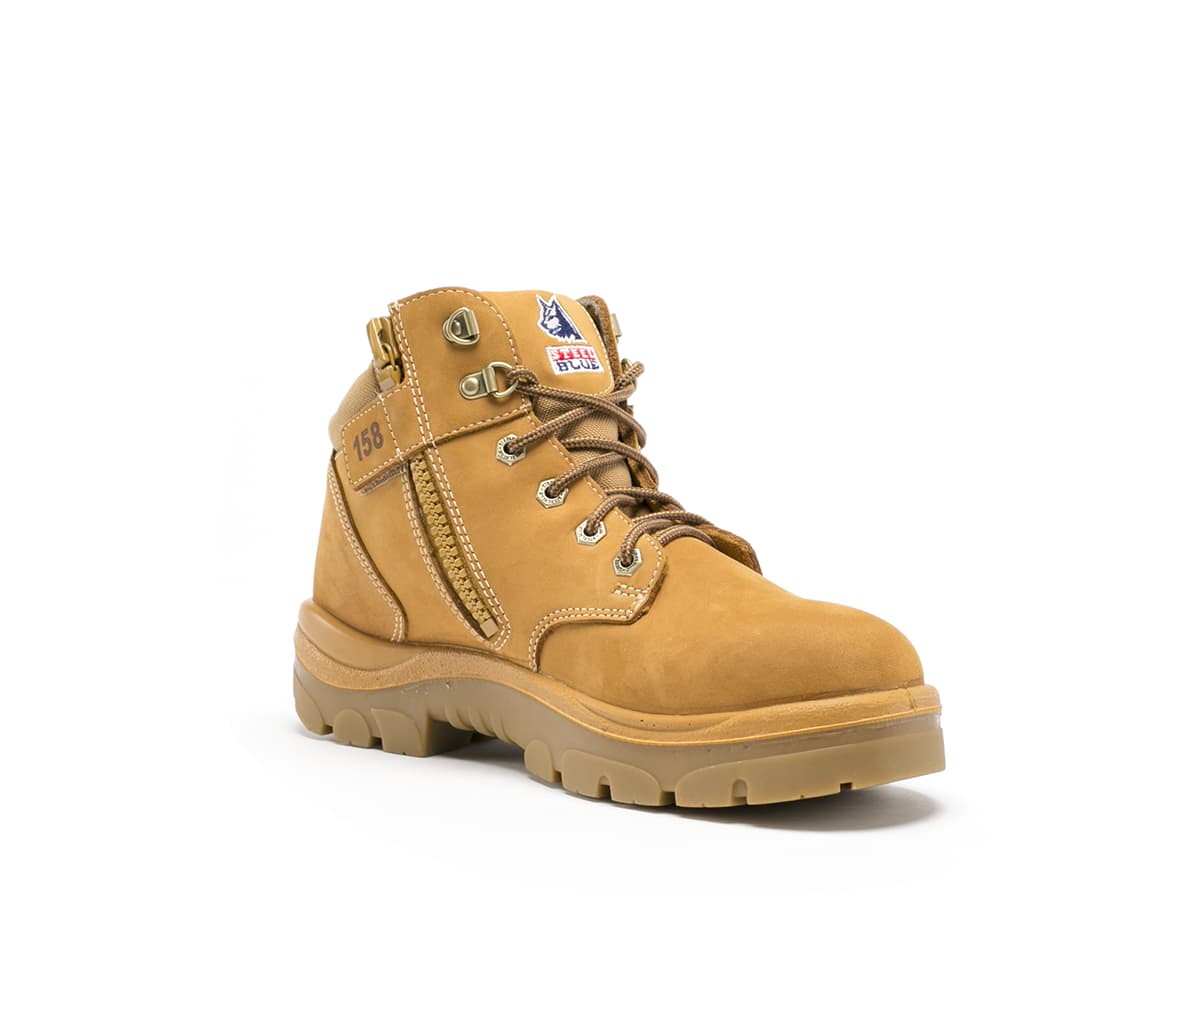 national workwear boots